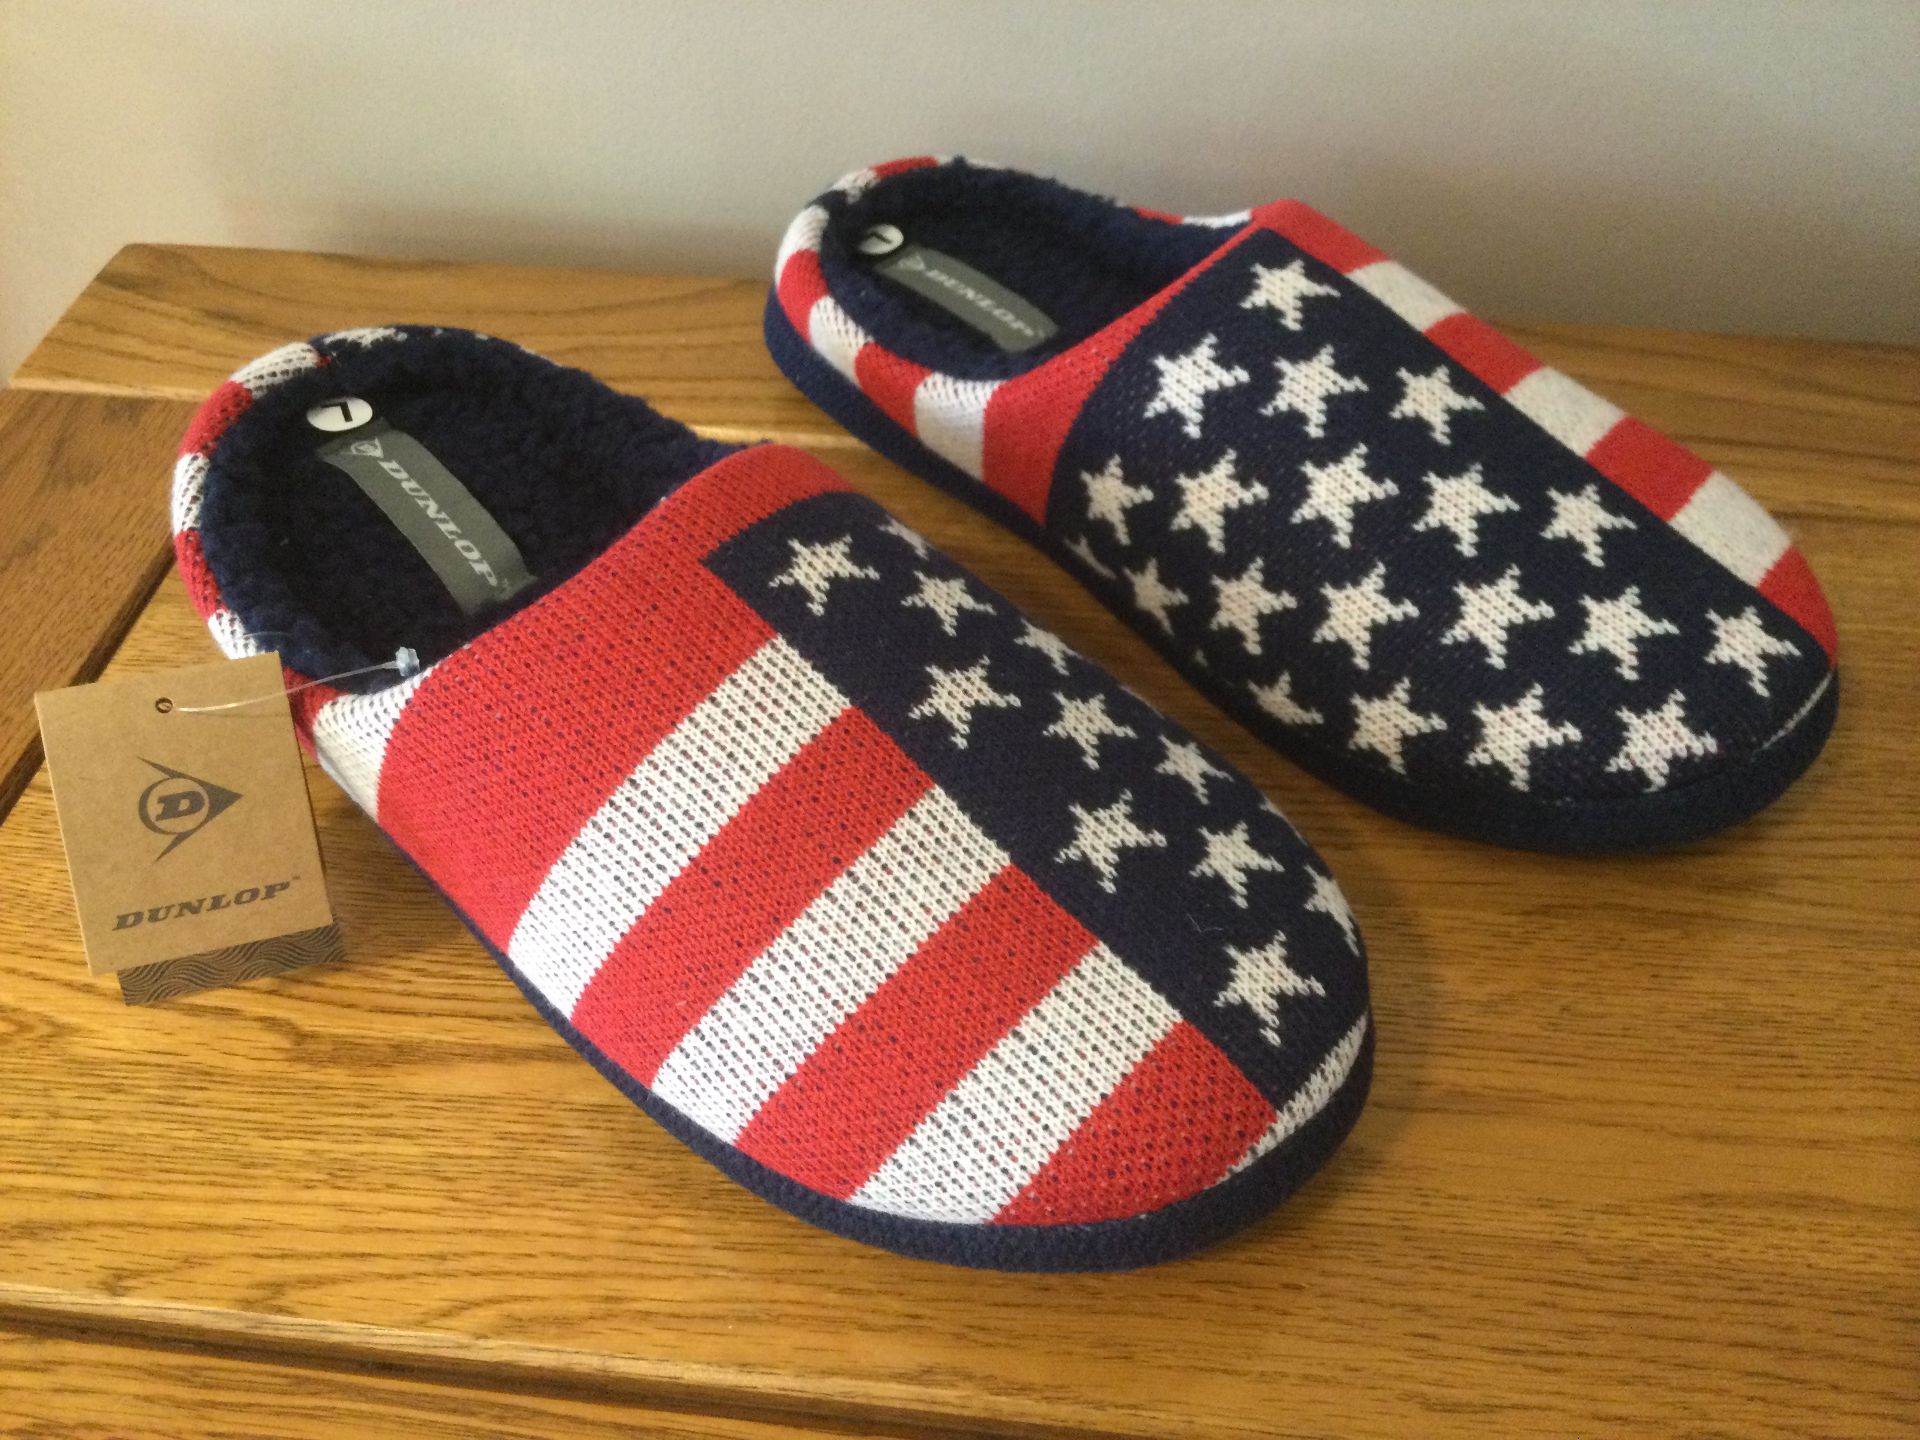 Men's Dunlop, “USA Stars and Stripes” Memory Foam, Mule Slippers, Size L (10/11) - New - Image 2 of 5